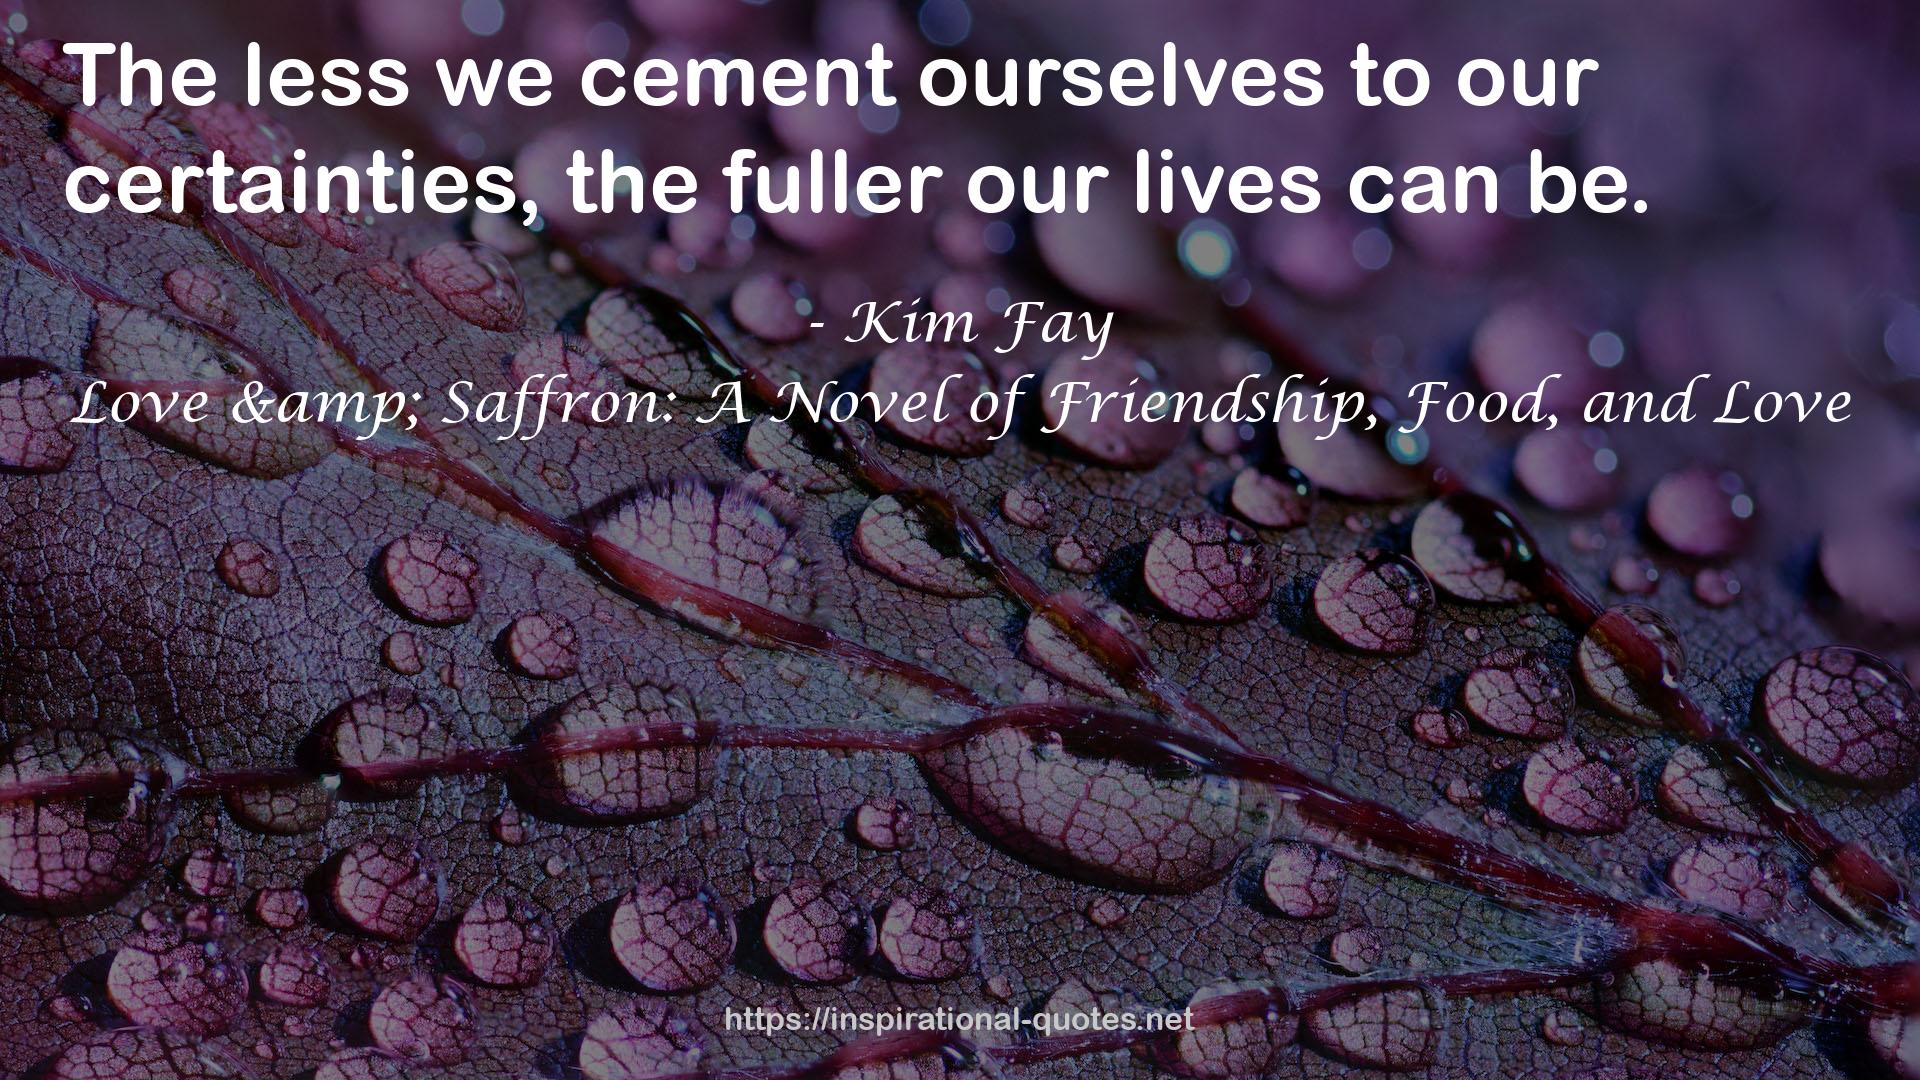 Love & Saffron: A Novel of Friendship, Food, and Love QUOTES